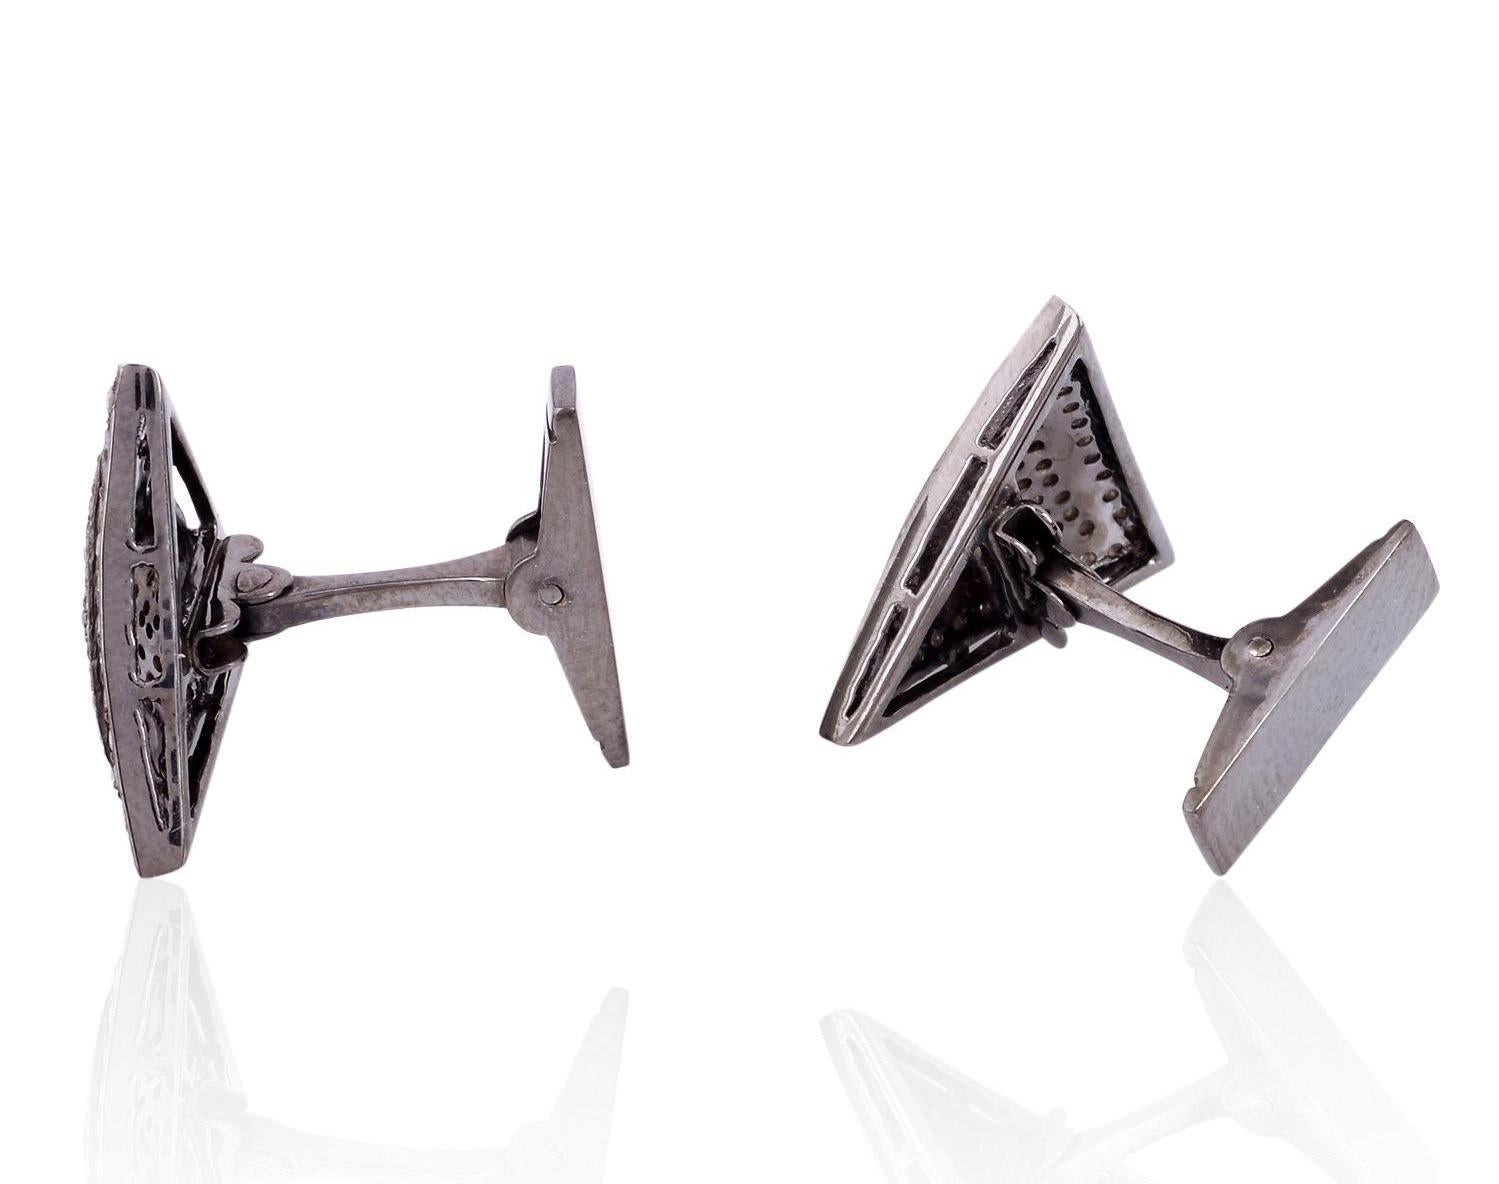 Cast from sterling silver, these triangle cuff links are hand set with 1.35 carats of pave diamonds in blackened finish.

FOLLOW  MEGHNA JEWELS storefront to view the latest collection & exclusive pieces.  Meghna Jewels is proudly rated as a Top